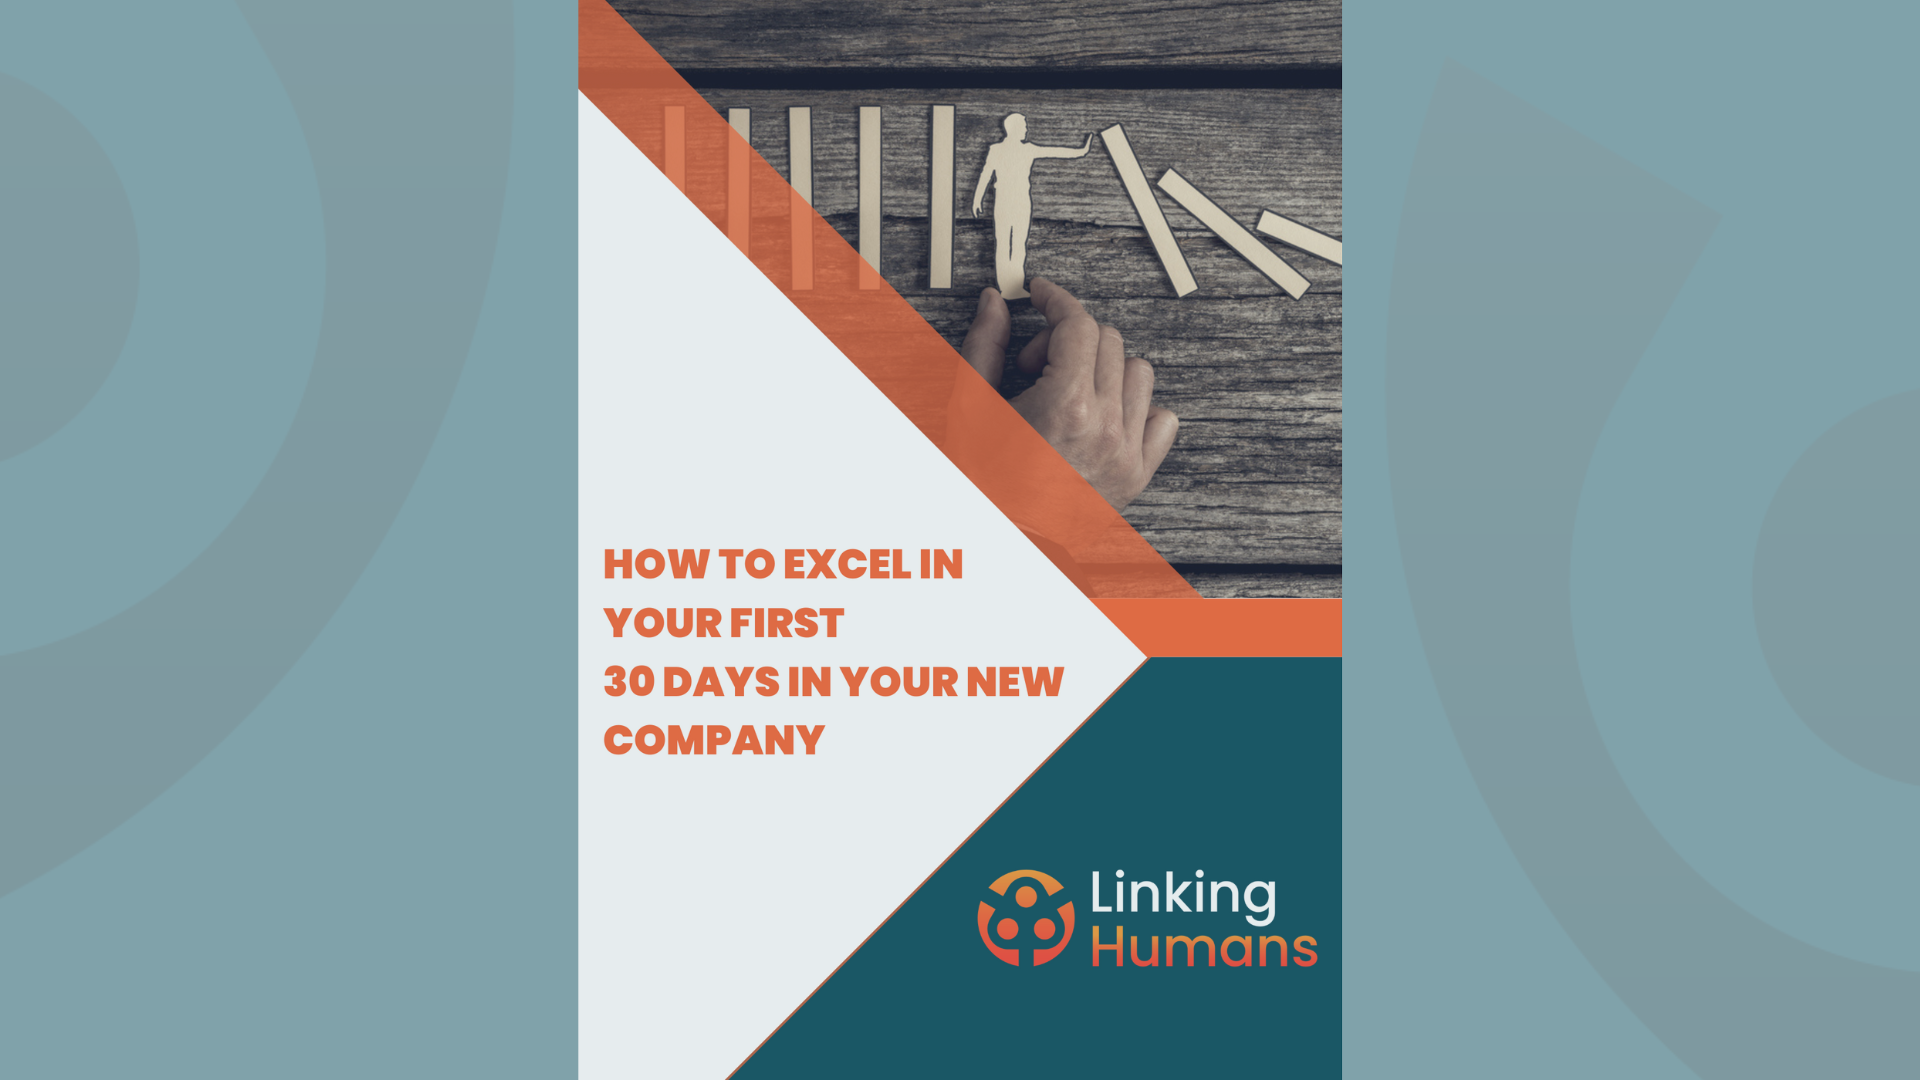 How to Excel in your first 30 days in your new company